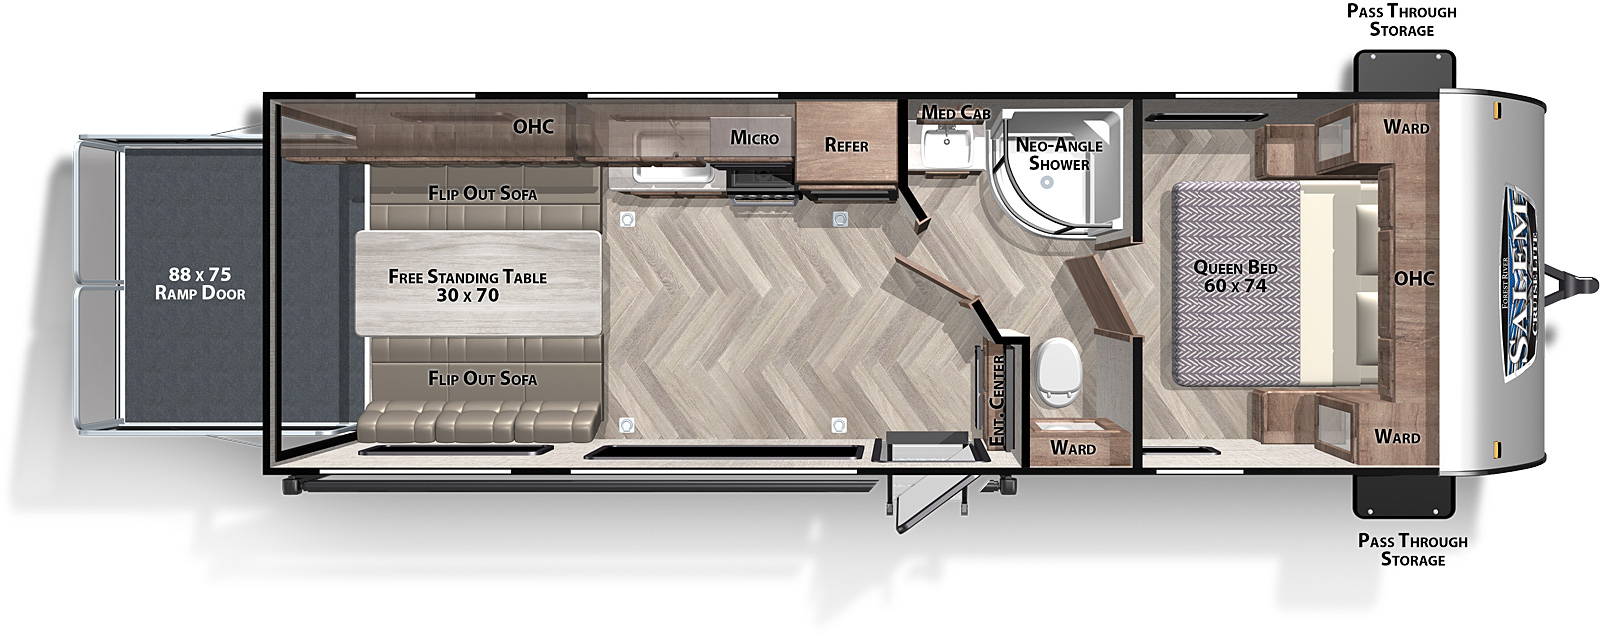 Cruise Lite Northwest 260RT floorplan. The 260RT has no slide outs and one entry door.